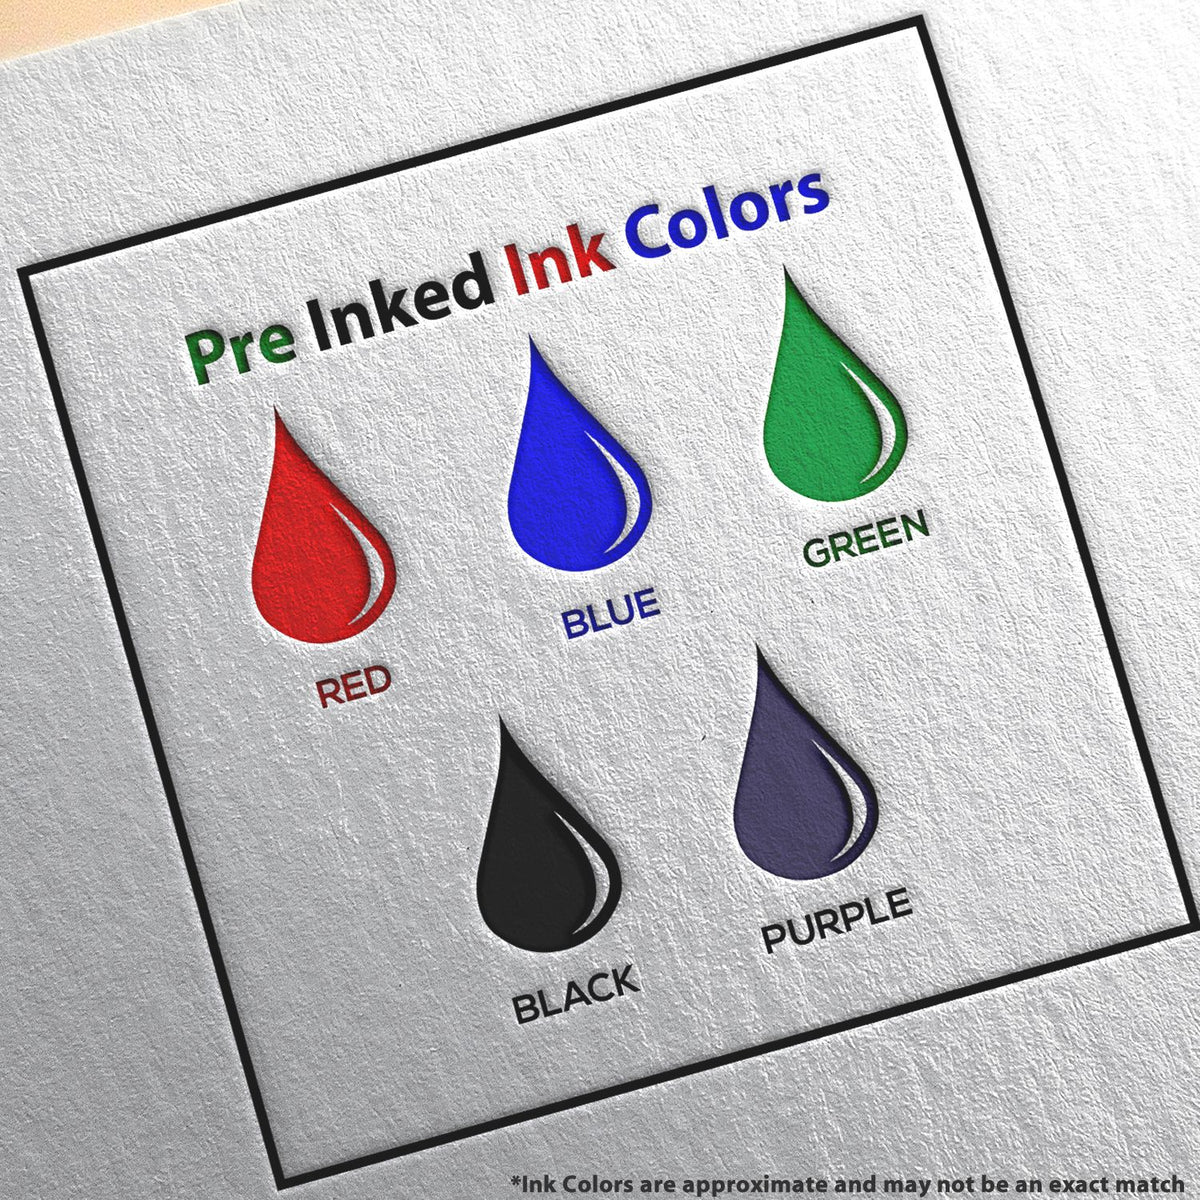 A picture showing the different ink colors or hues available for the Slim Pre-Inked Nebraska Professional Engineer Seal Stamp product.